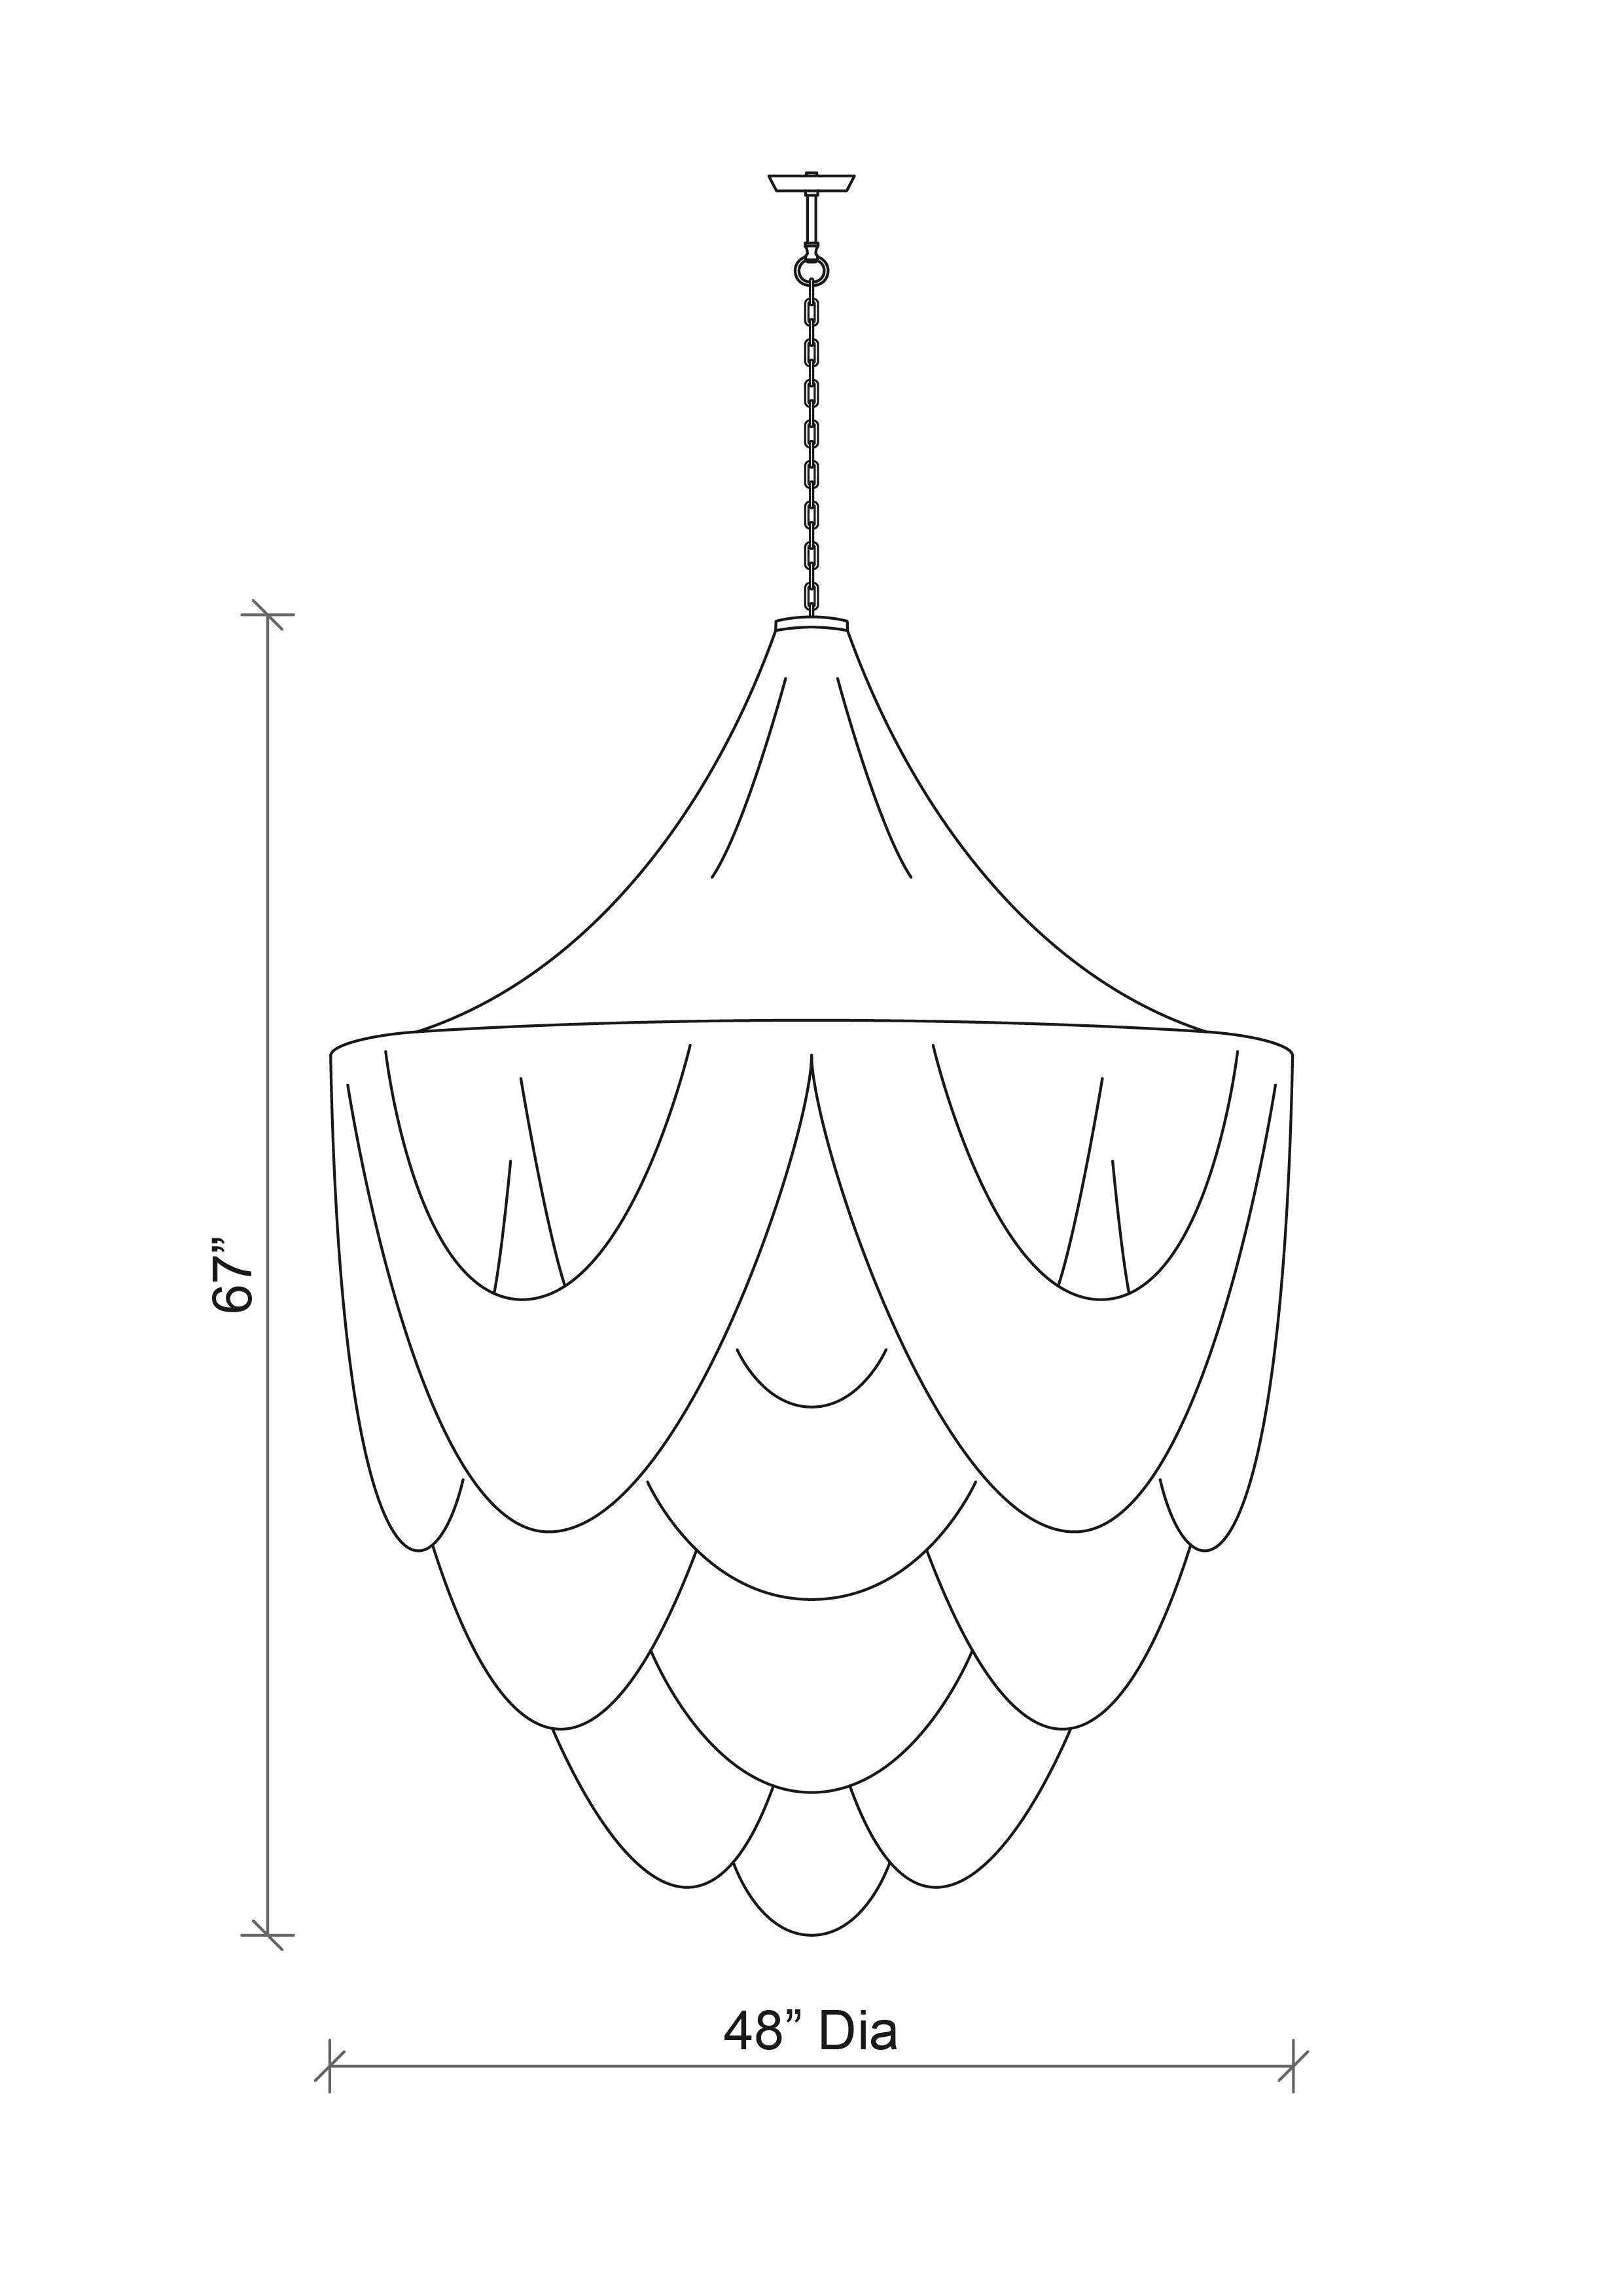 XXL Round Whisper with Crown Leather Chandelier in Metallic Leather